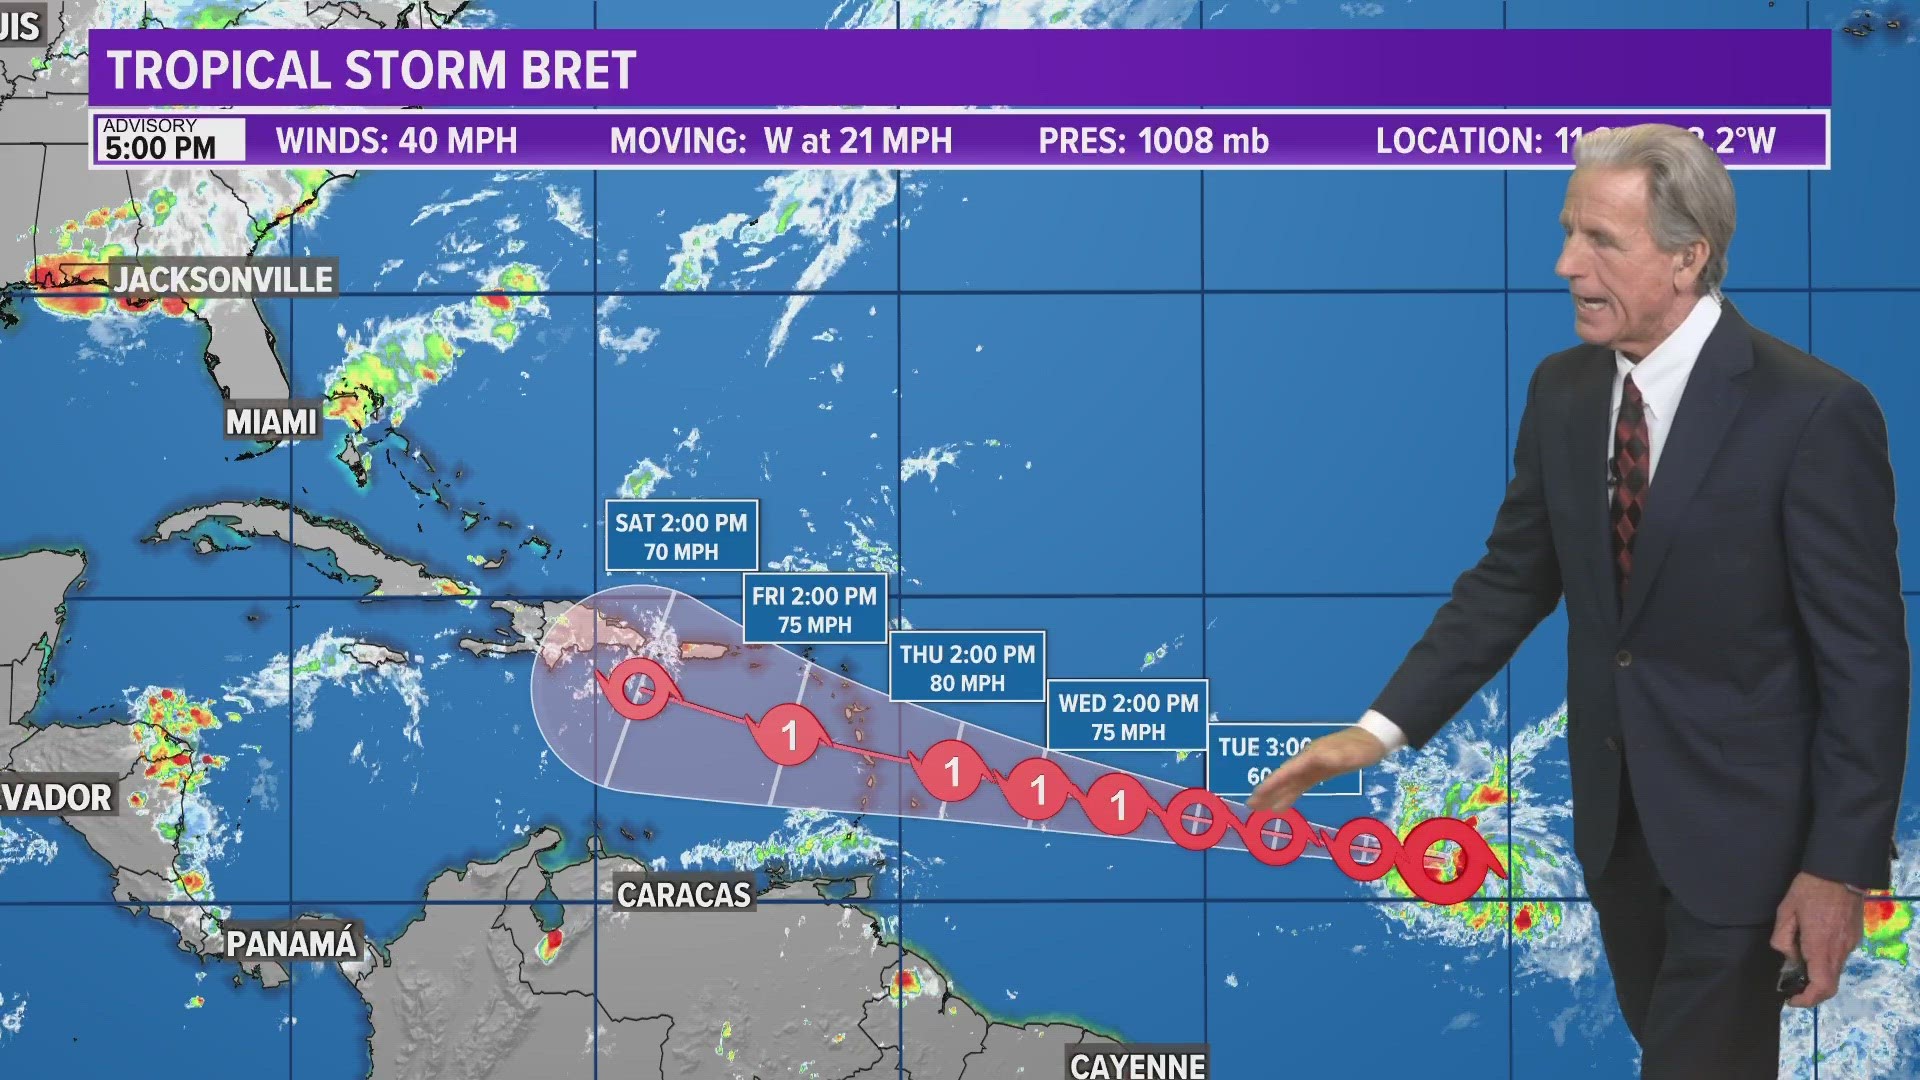 Tropical Storm Brett could hurricane, here's how Florida could